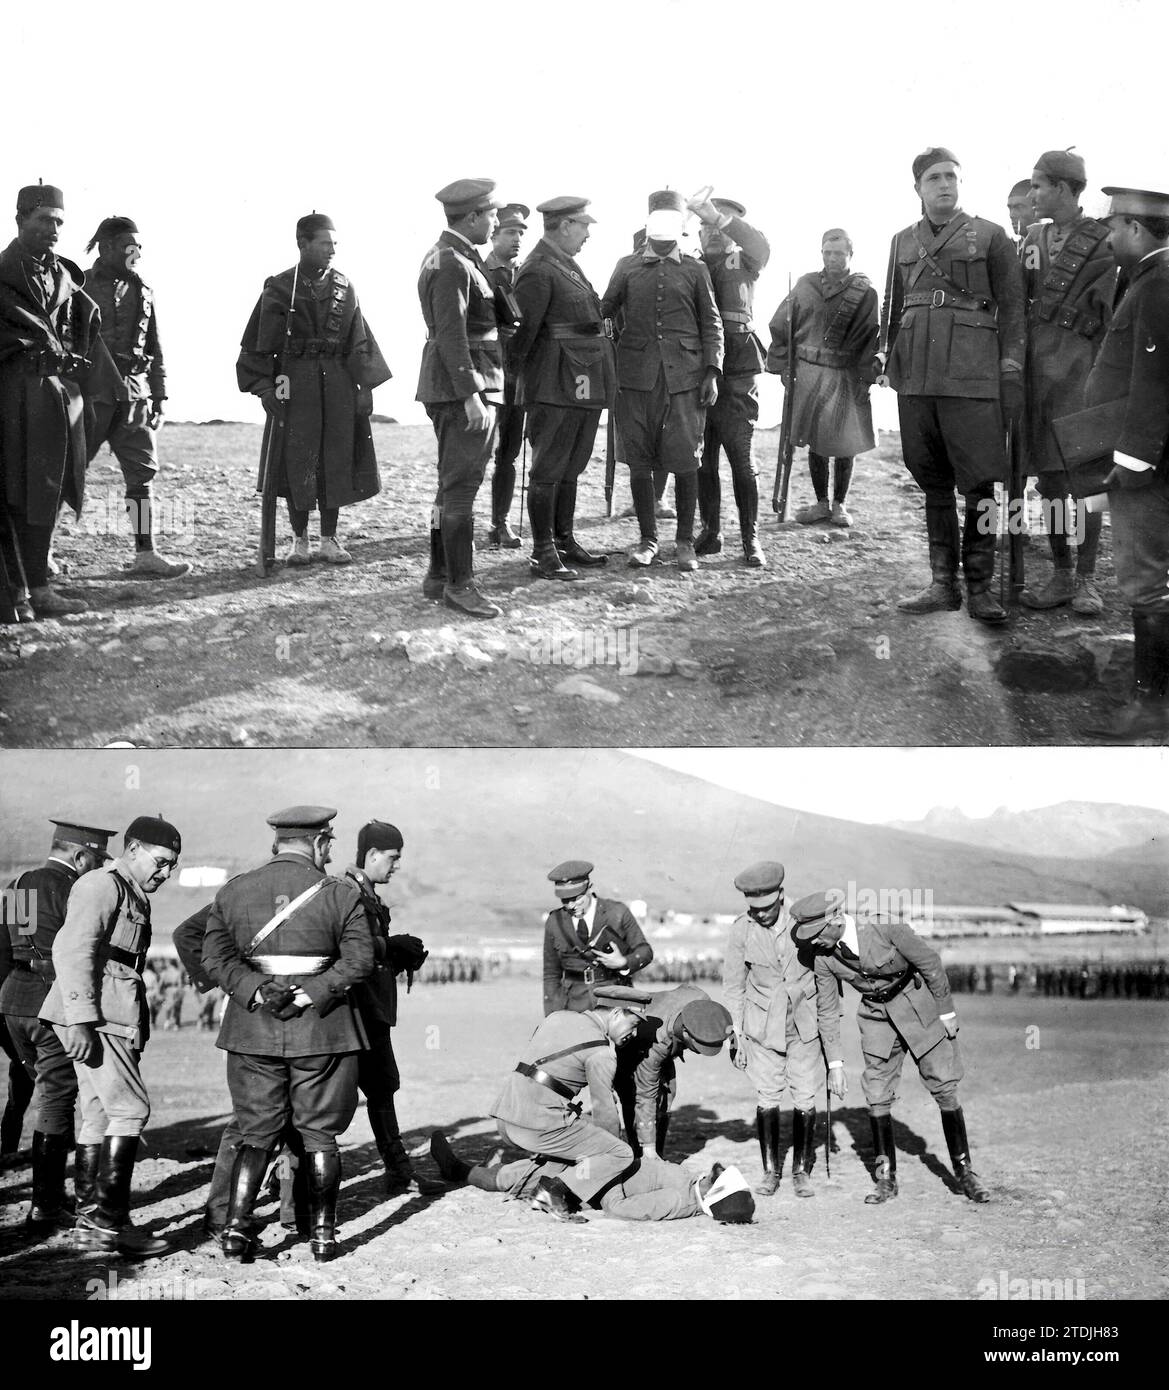 09/30/1922. Melilla. Execution of a Moro officer. 1. Time to blindfold the former Regulars officer Sidi Mohamed ben amar to shoot him, 2. After the Execution, recognition of the Corpse. (Litran photo). Credit: Album / Archivo ABC / Litran Stock Photo